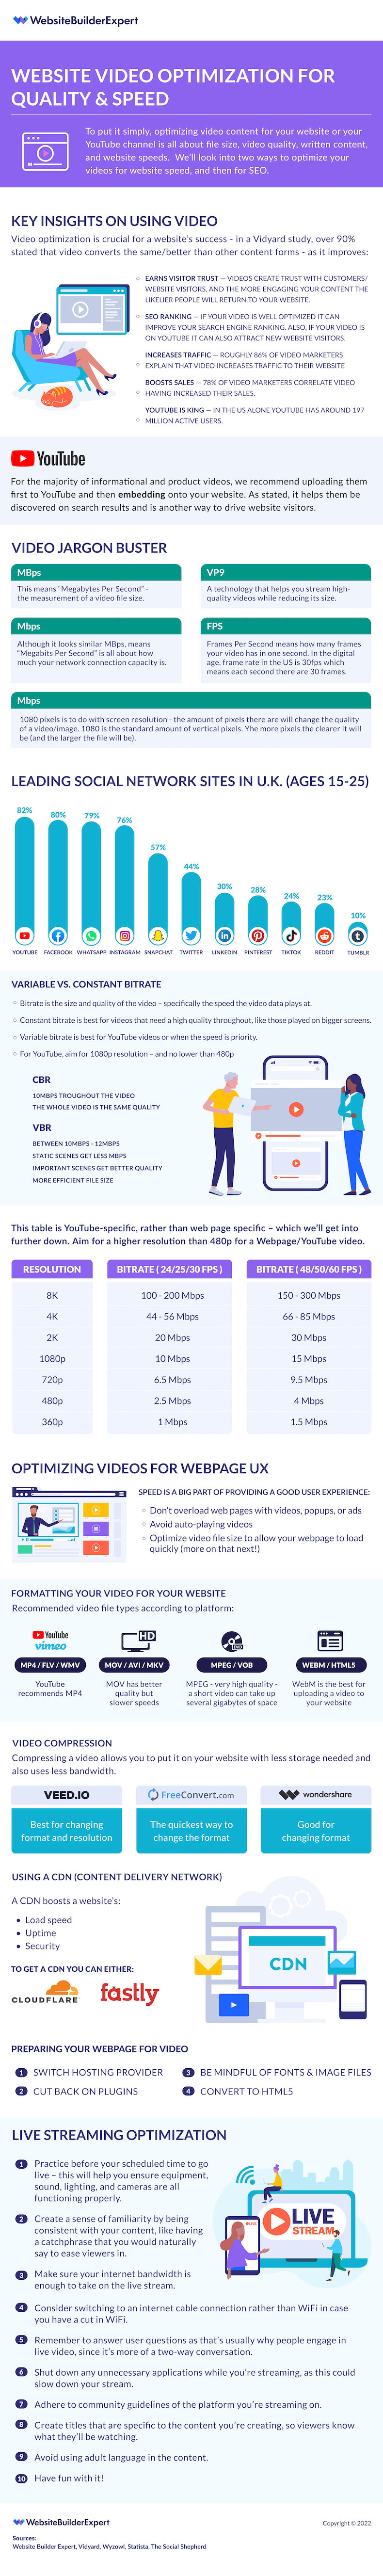 Website video optimization for quality and speed infographic